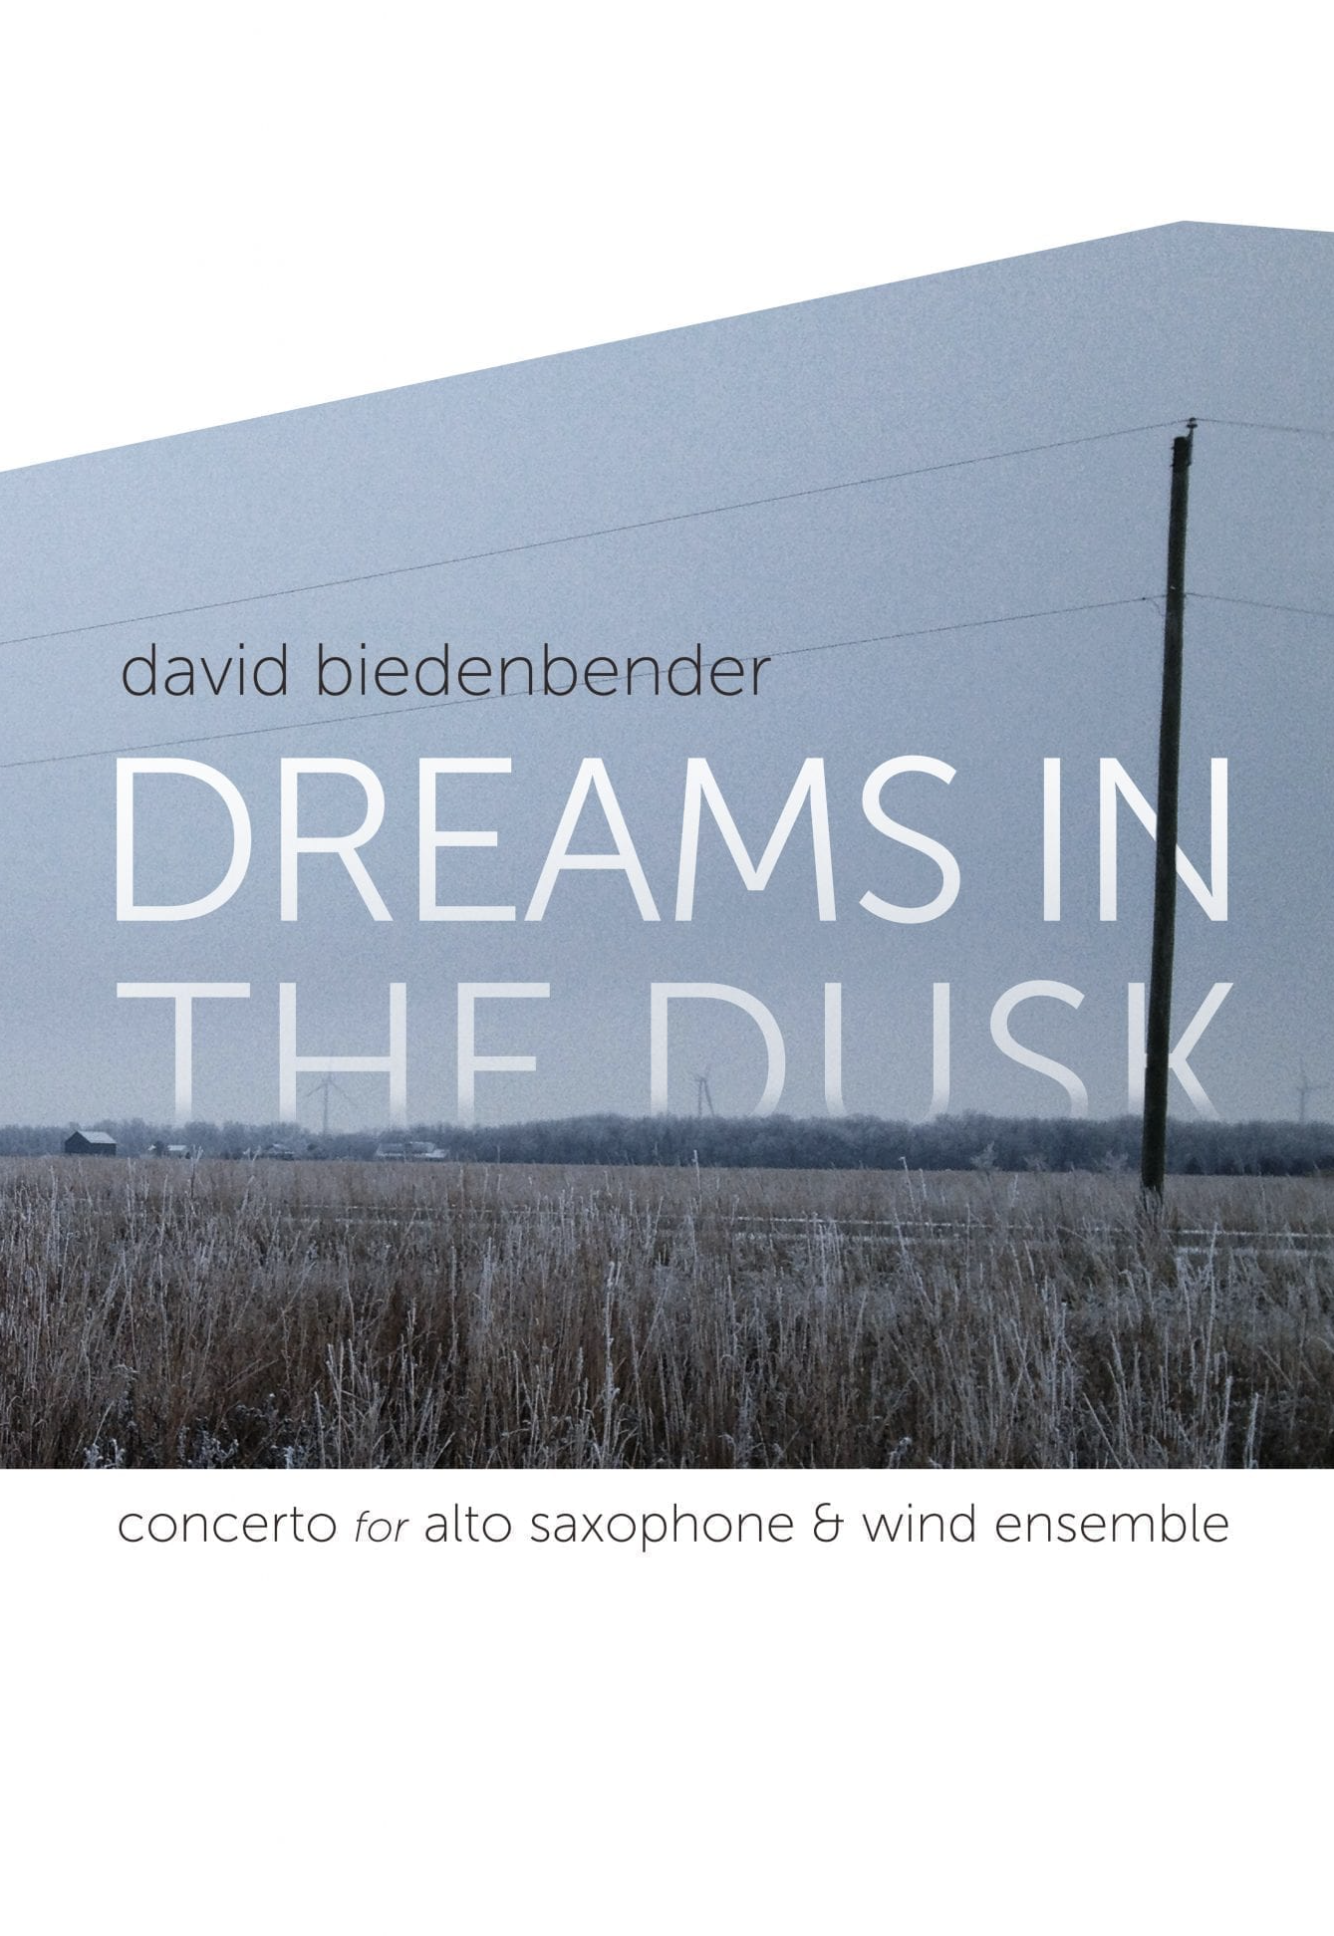 Dreams In The Dusk - Full Concerto For Alto Saxophone And Wind Ensemble by David Biedenbender